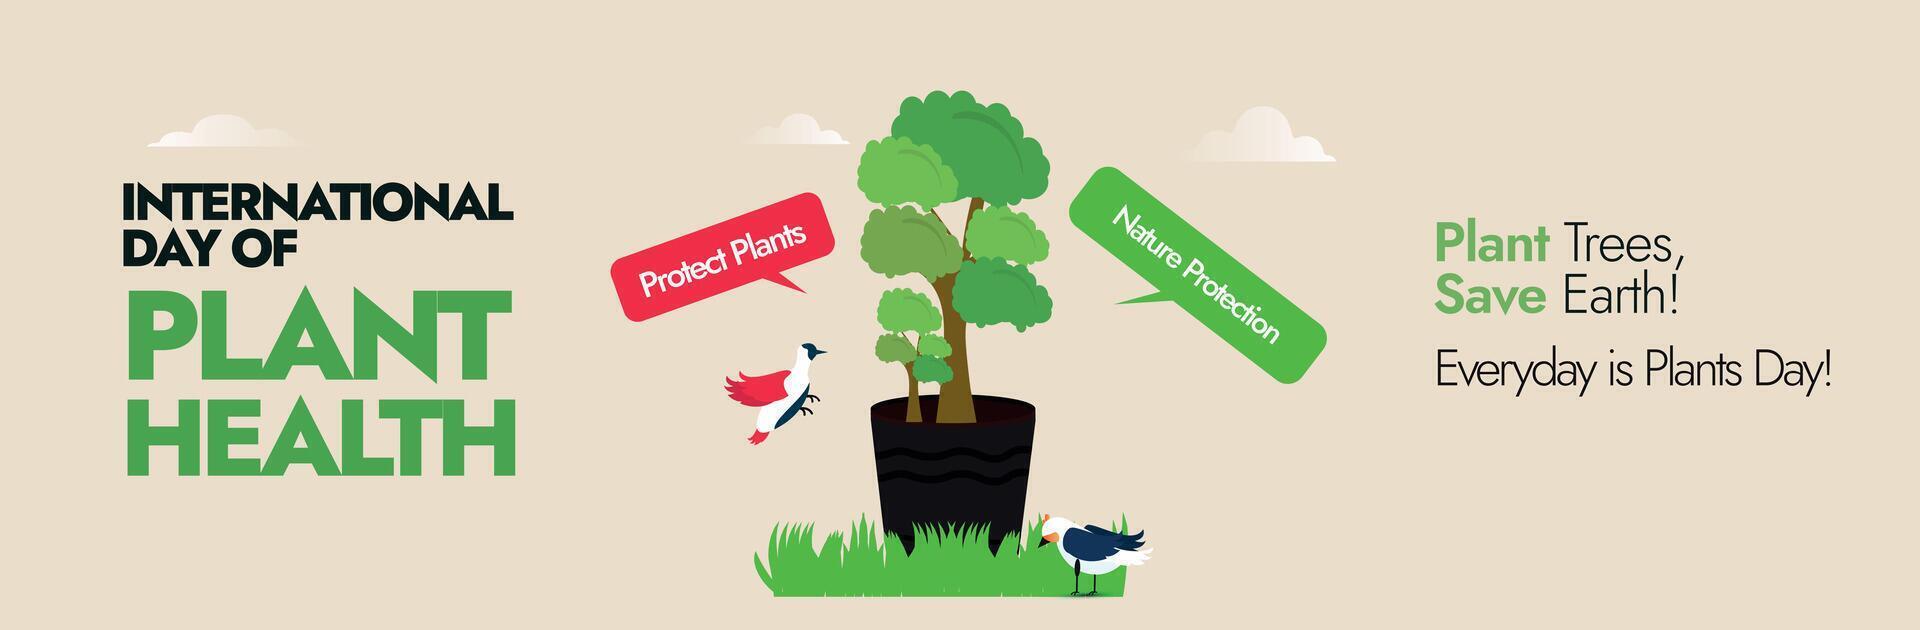 International day of Plant Health. 12th May International day of plant Health cover banner with mini plant, birds and speech bubbles protect plants, nature protection. Cover banner idea for plants. vector